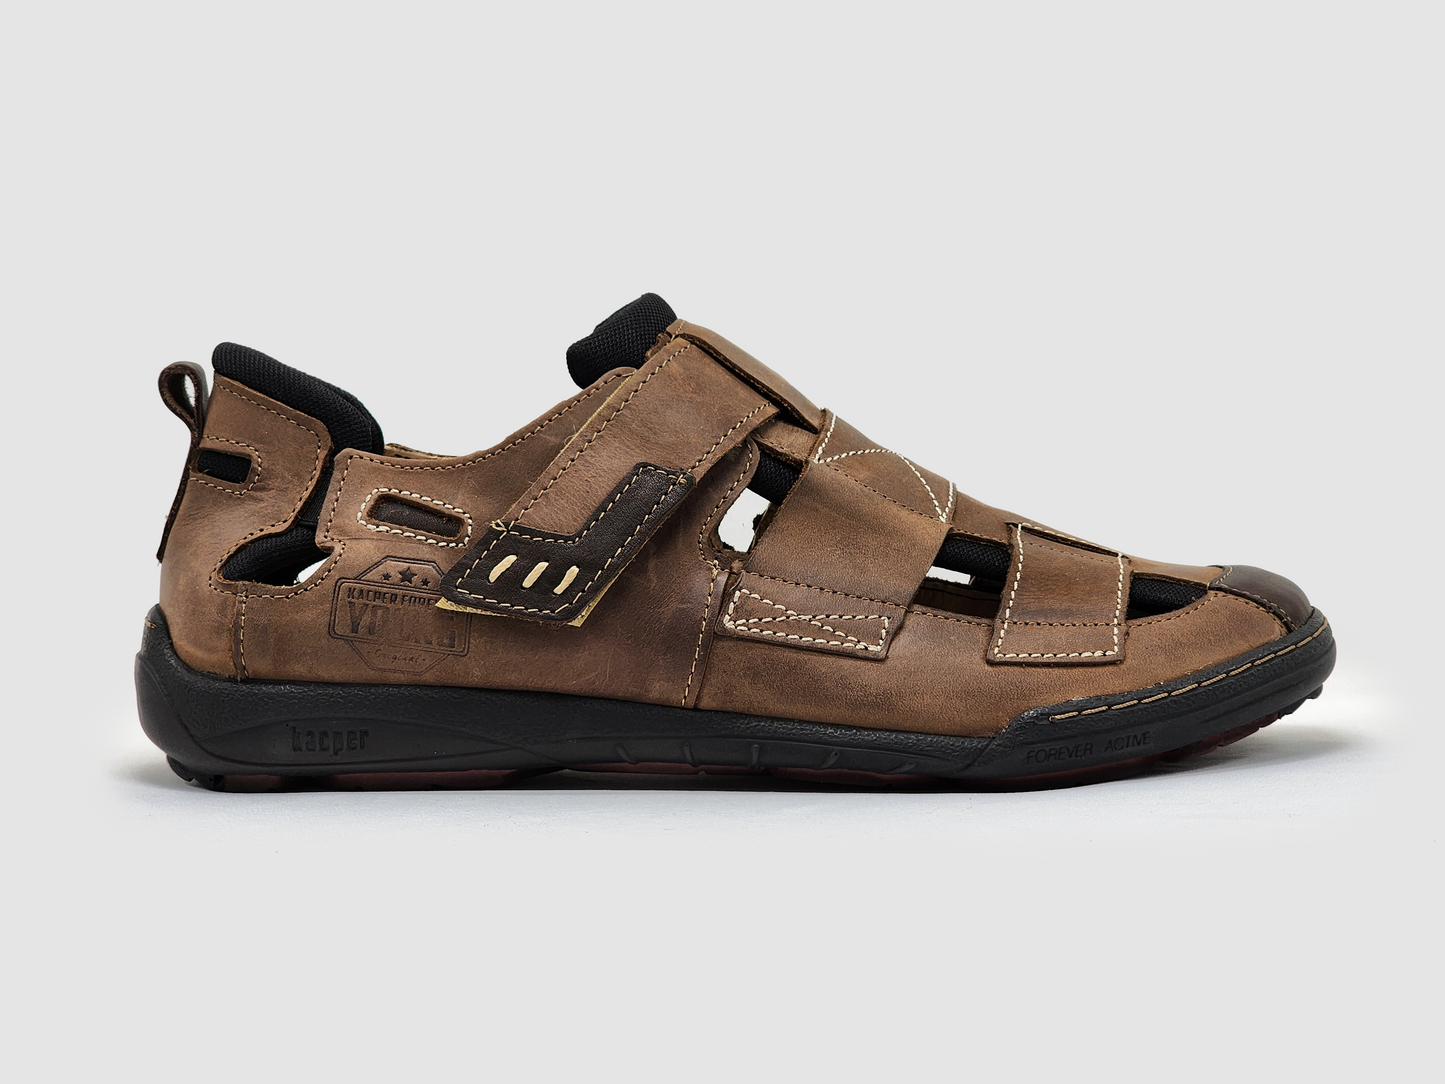 Men's Leather Sandals - Brown - Kacper Global Shoes 